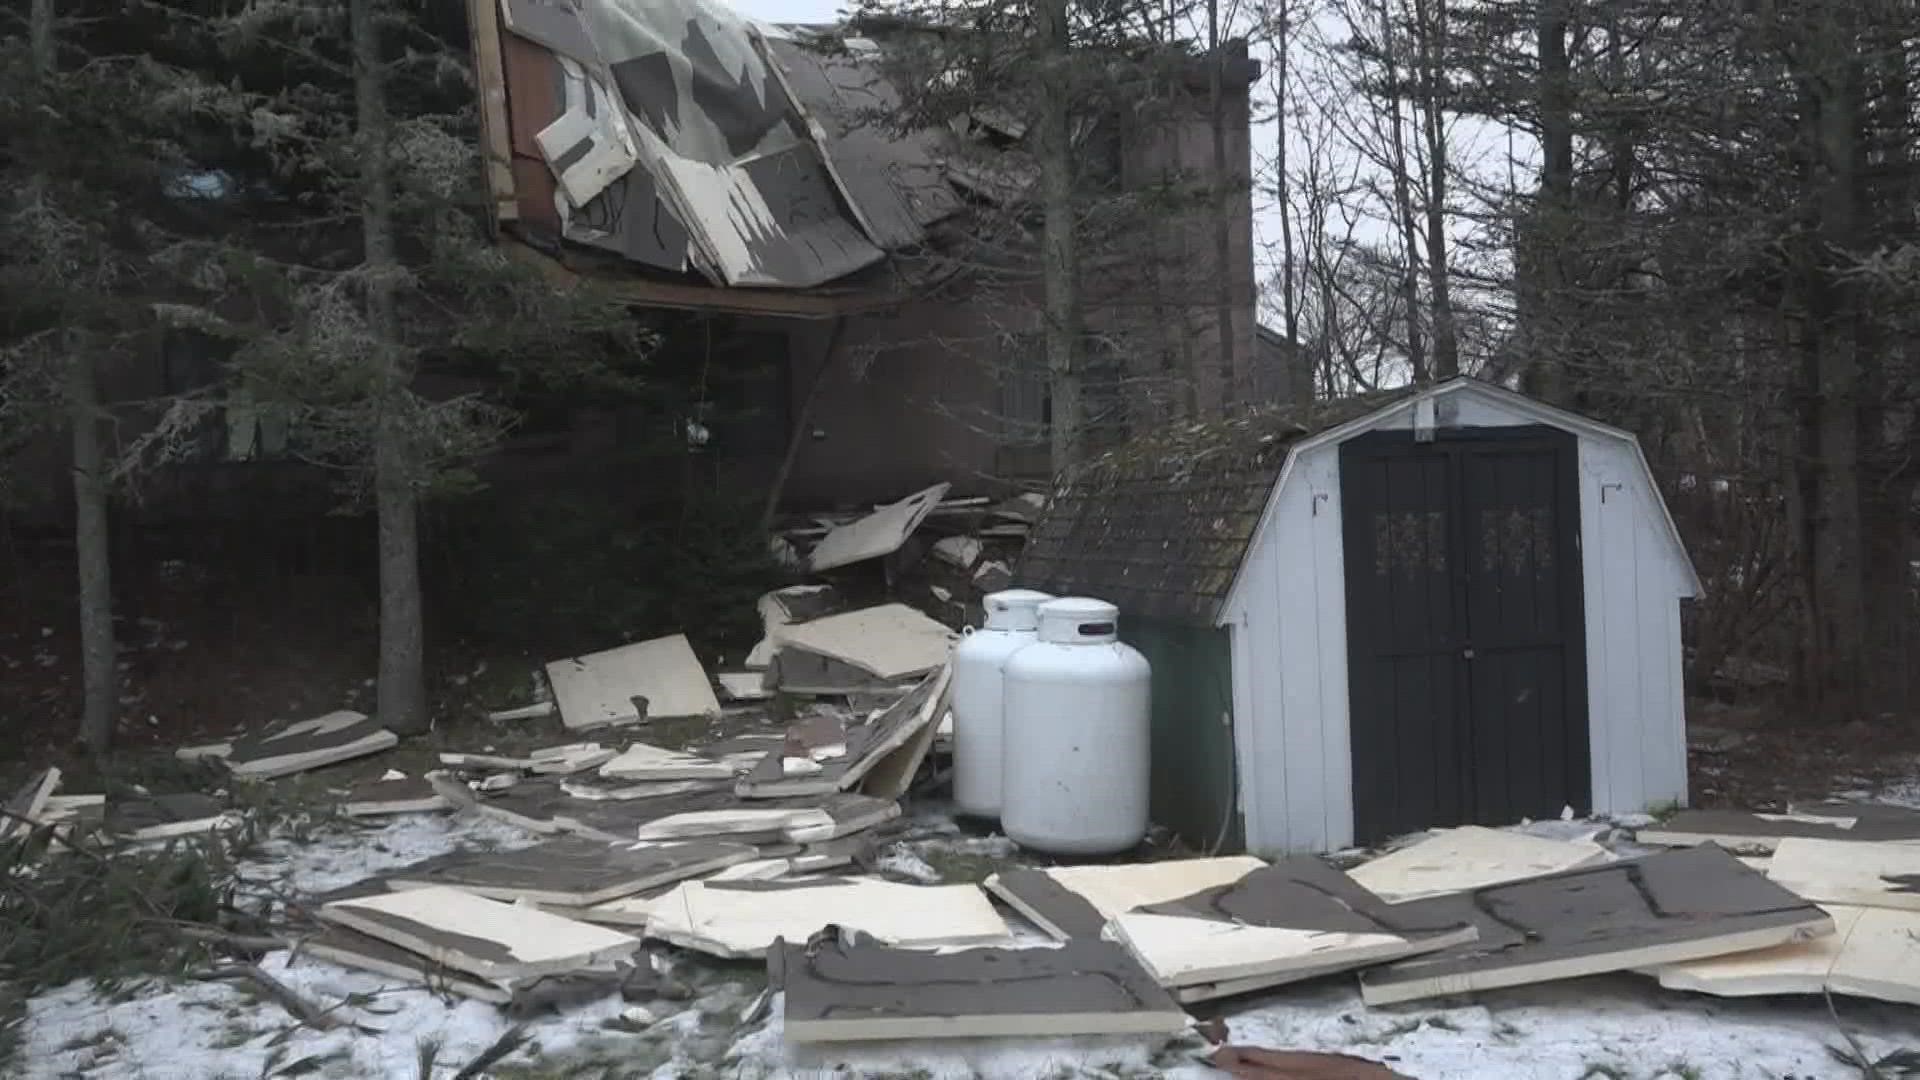 The roof collapsed Monday afternoon, according to authorities.